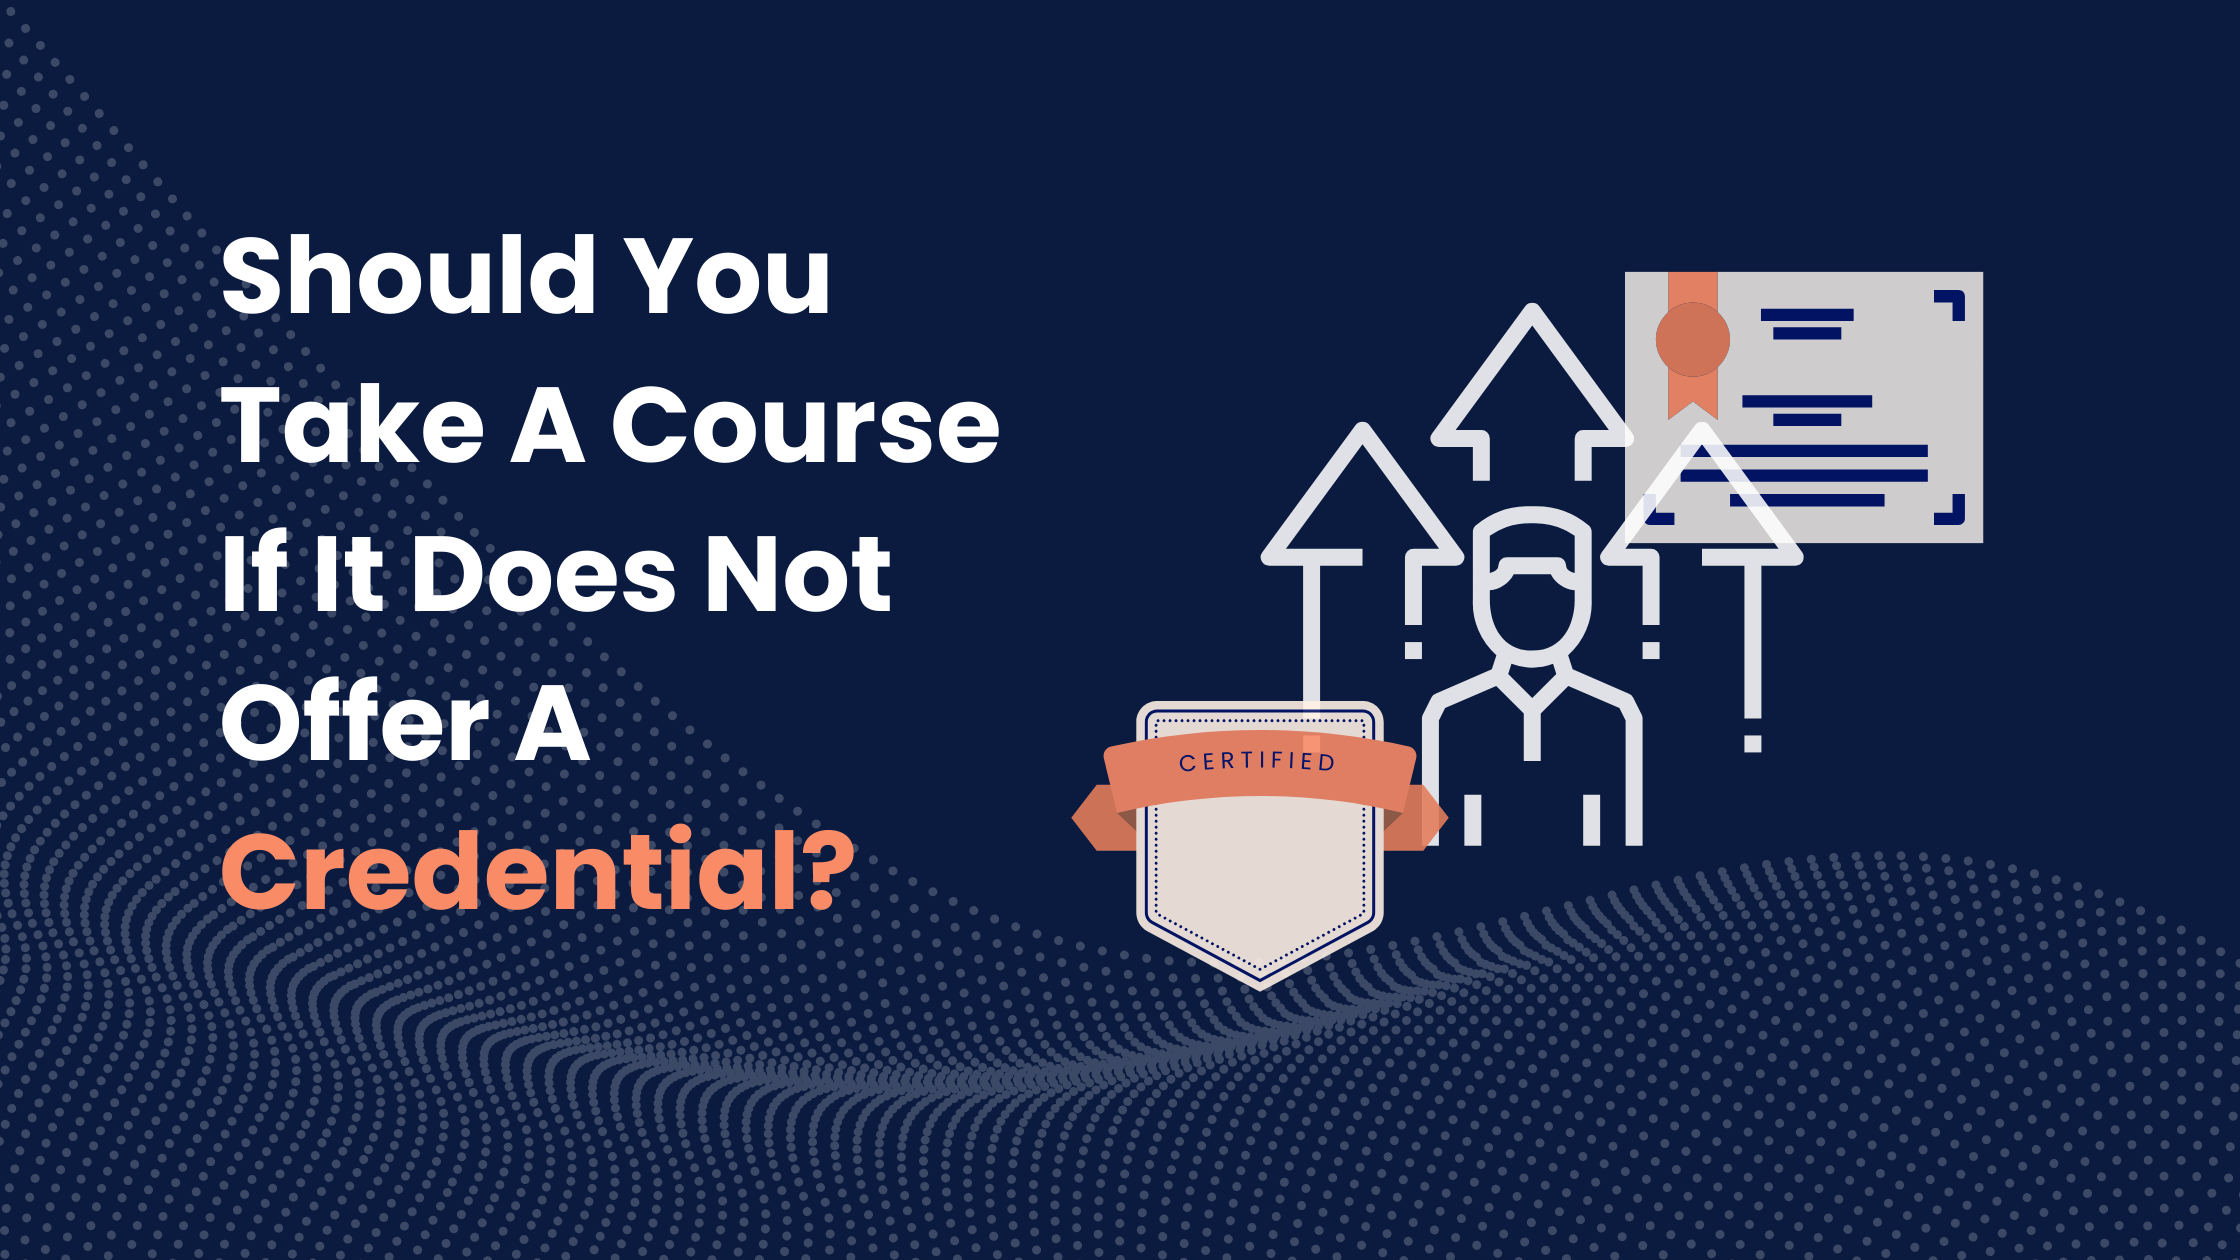 Should You Take A Course If It Does Not Offer A Certificate?